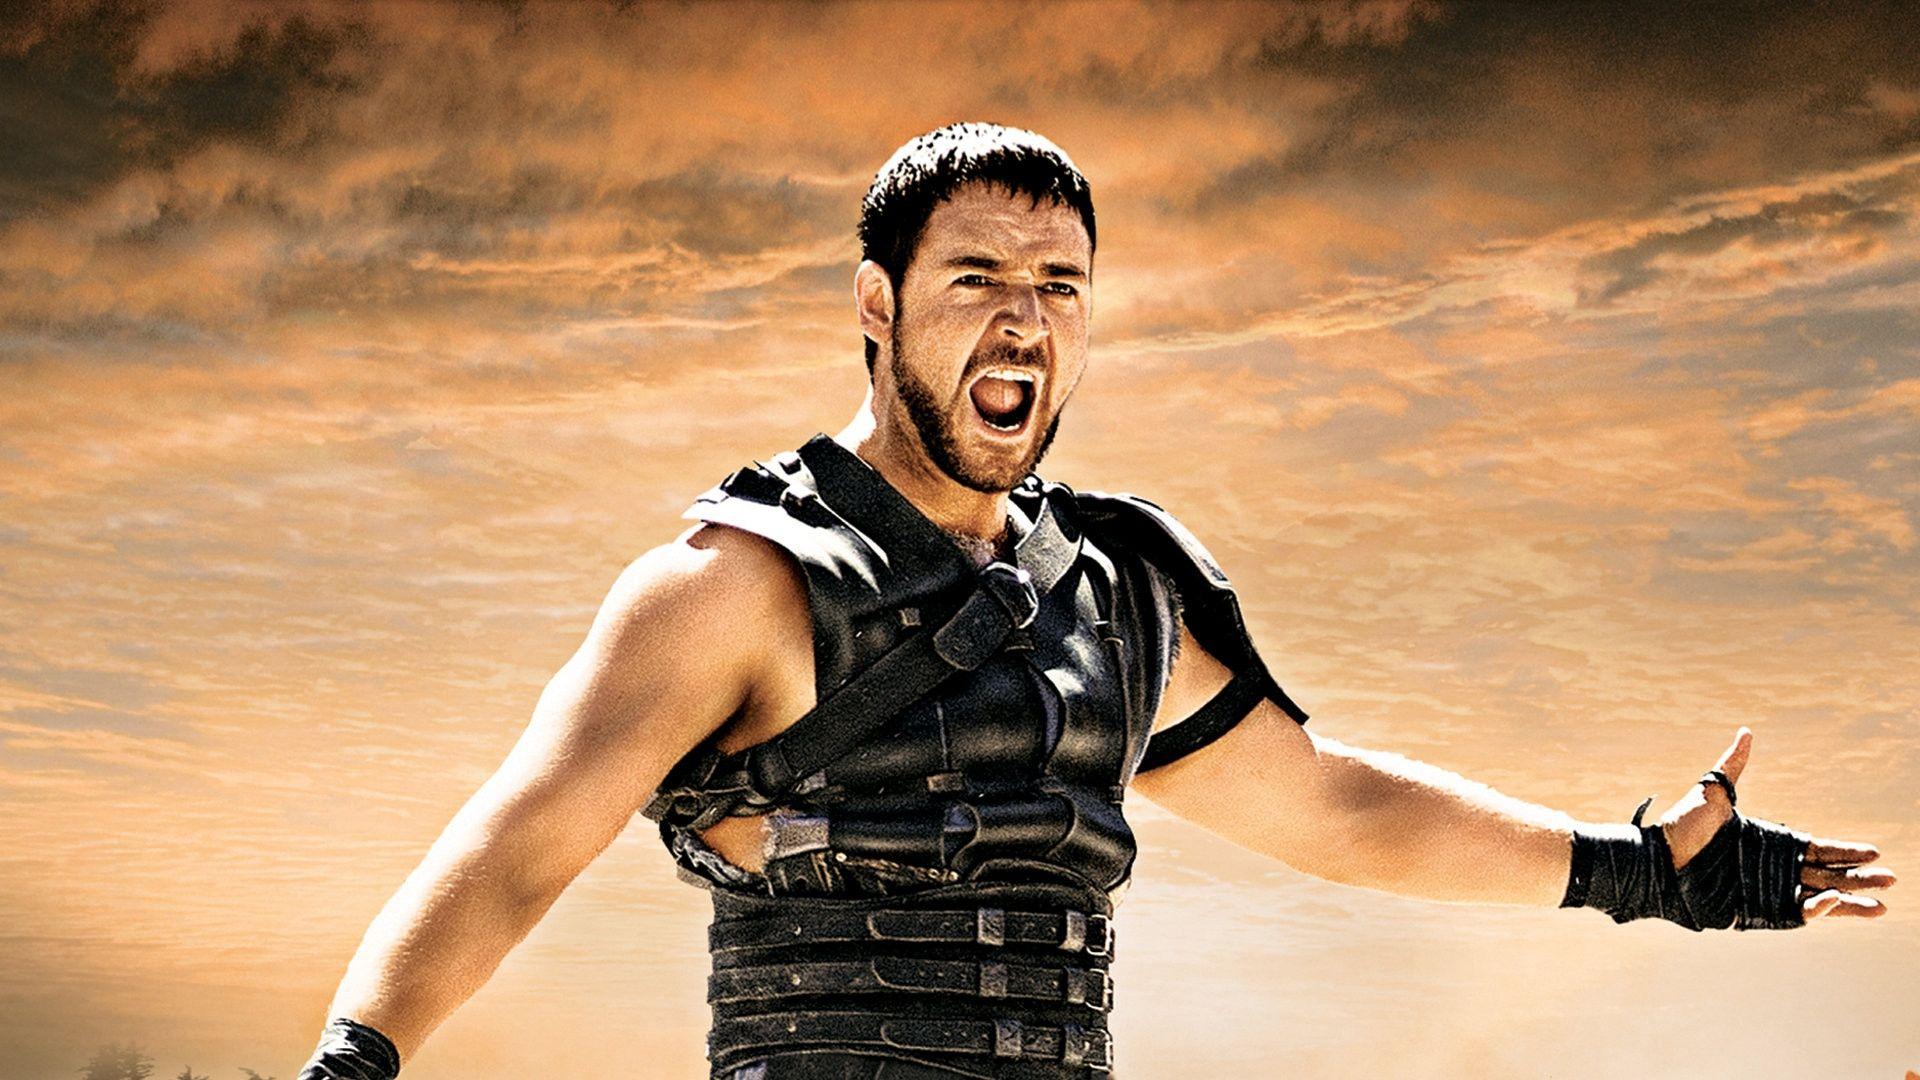 Download Wallpaper 1920x1080 Gladiator, Russell crowe, Maximus